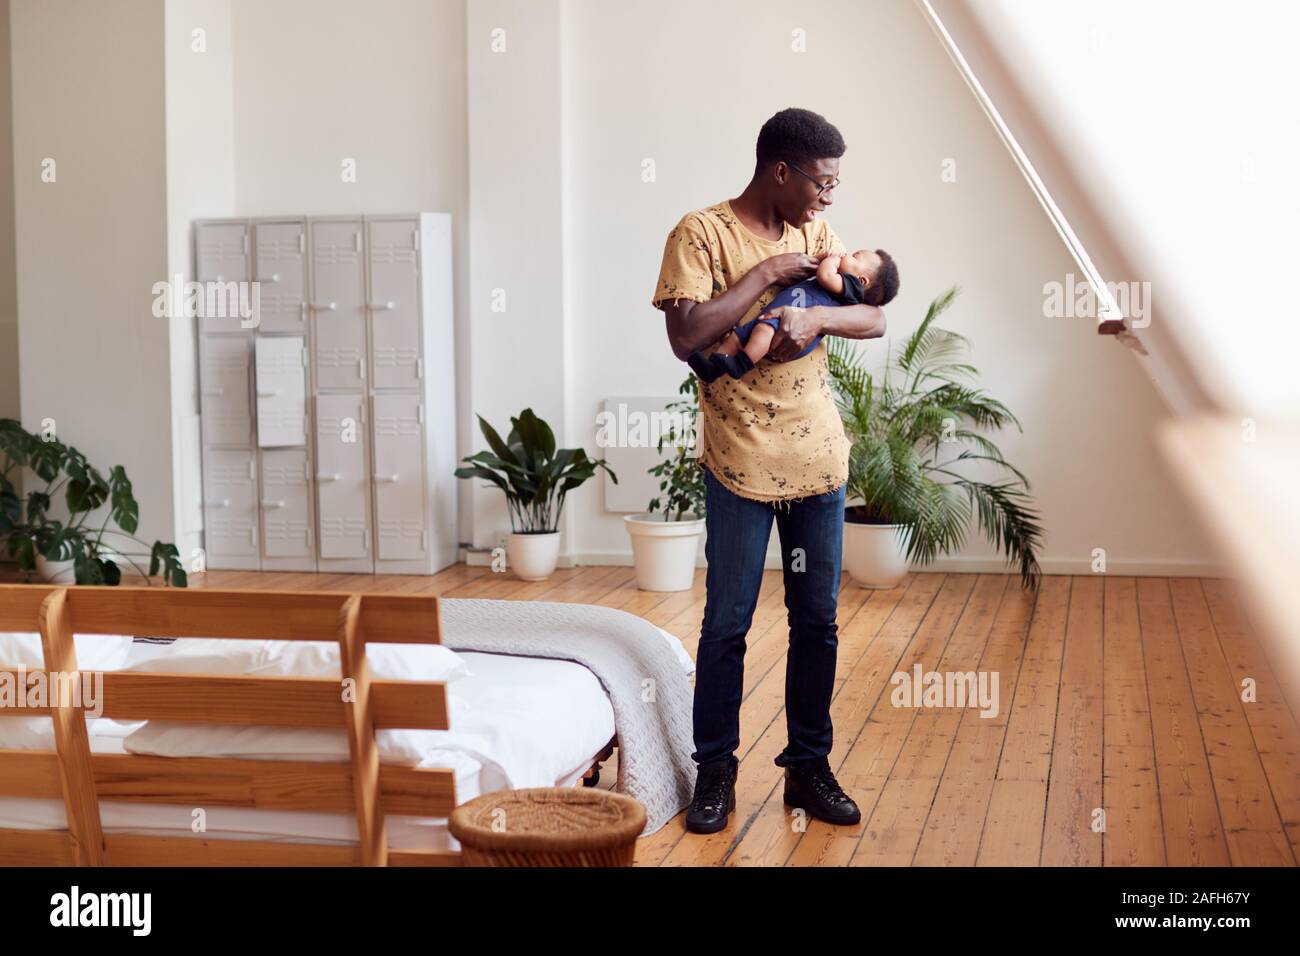 Loving Father Holding Newborn Baby At Home In Loft Apartment Stock Photo